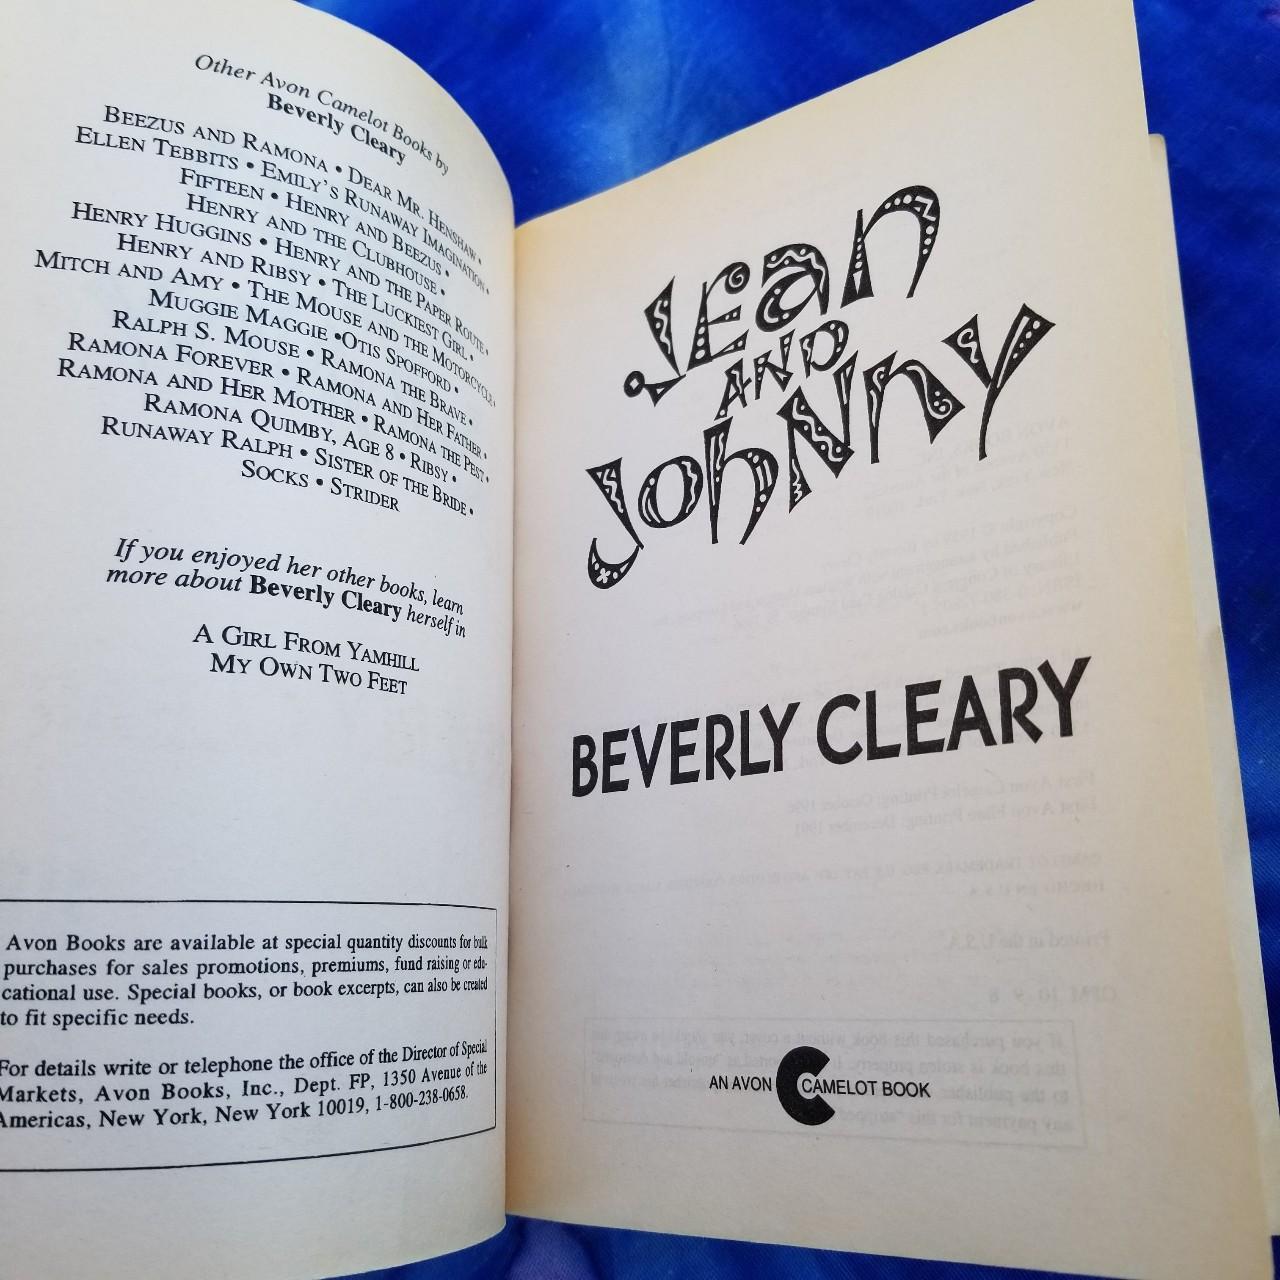 and　Beverly　Jean　Book　☆...　Depop　Johnny　Cleary　☆　Vintage